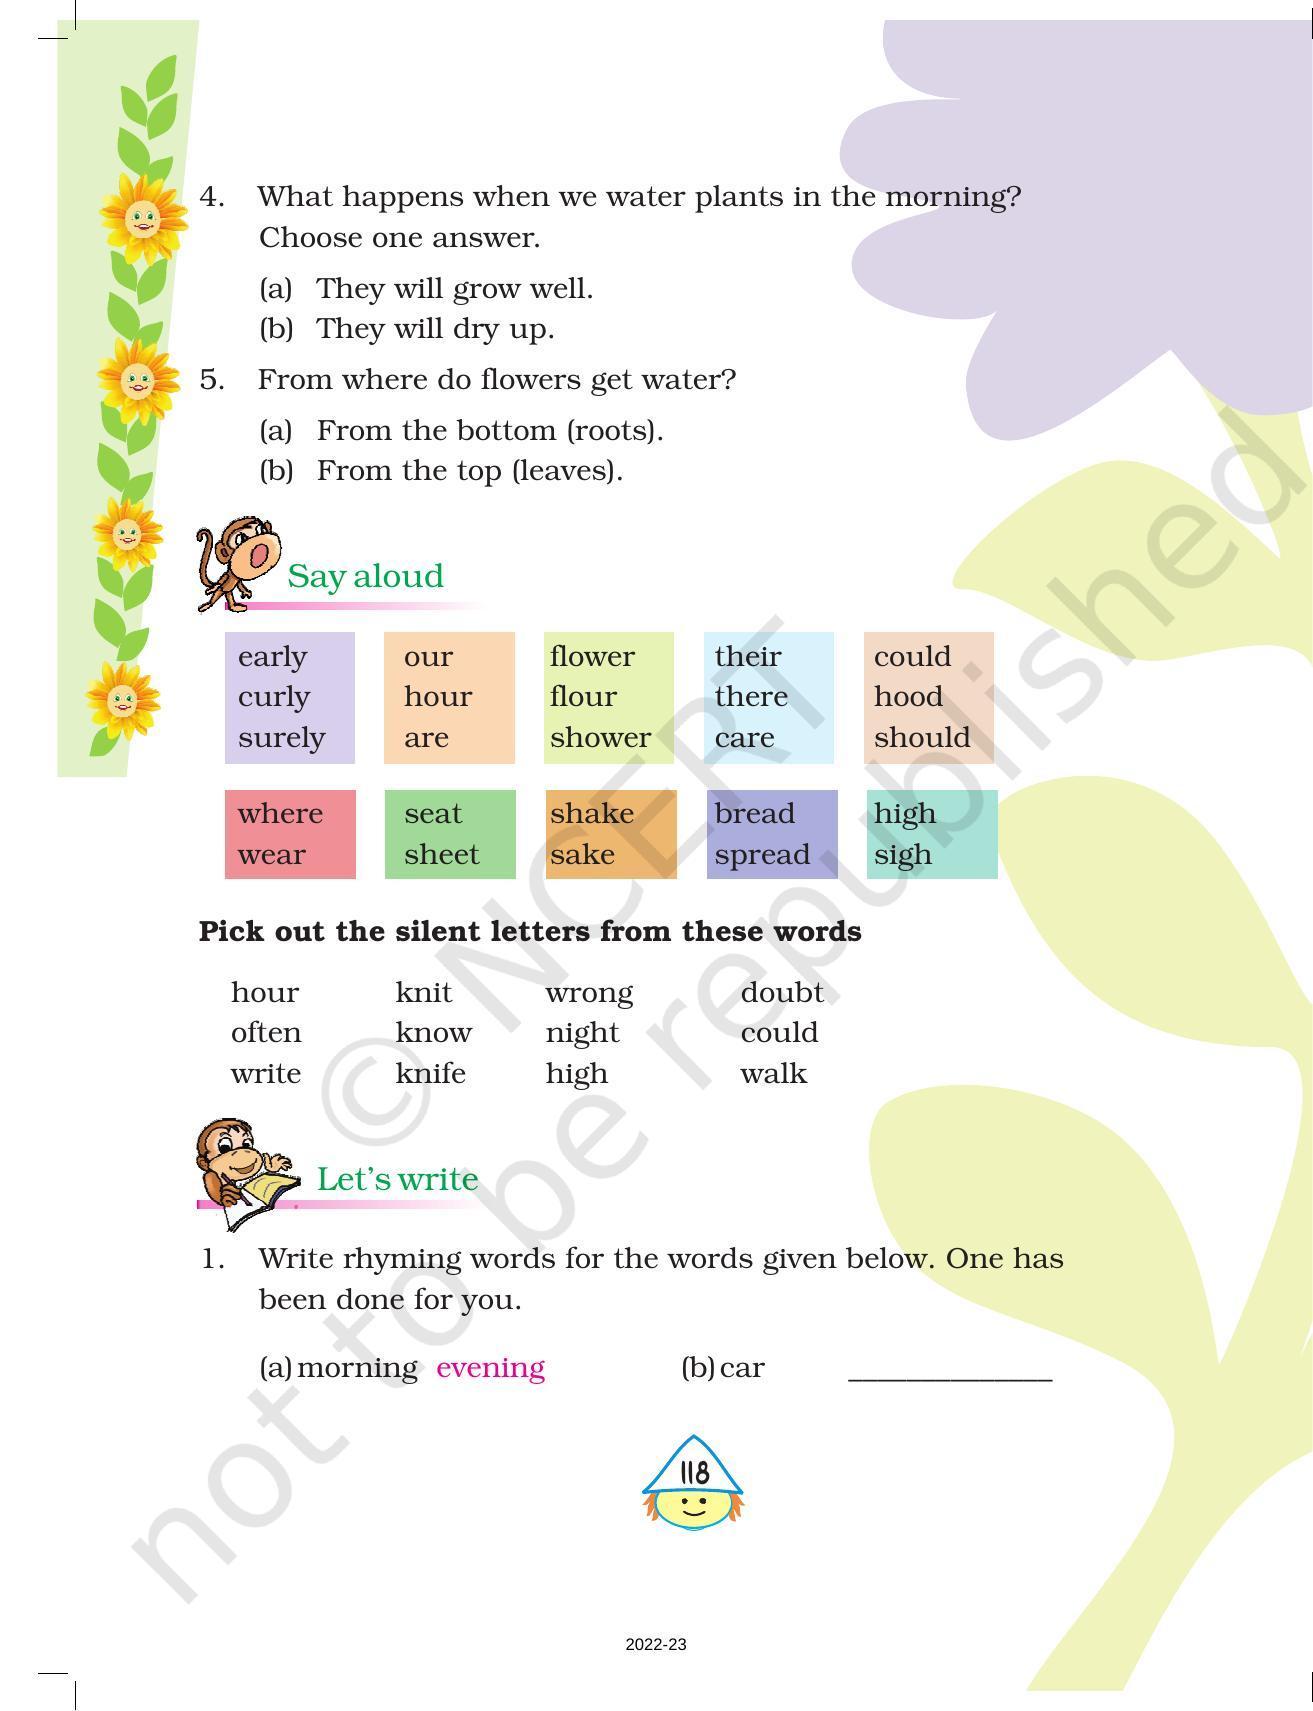 NCERT Book for Class 4 English (Poem): Chapter 13-A Watering Rhyme - Page 6